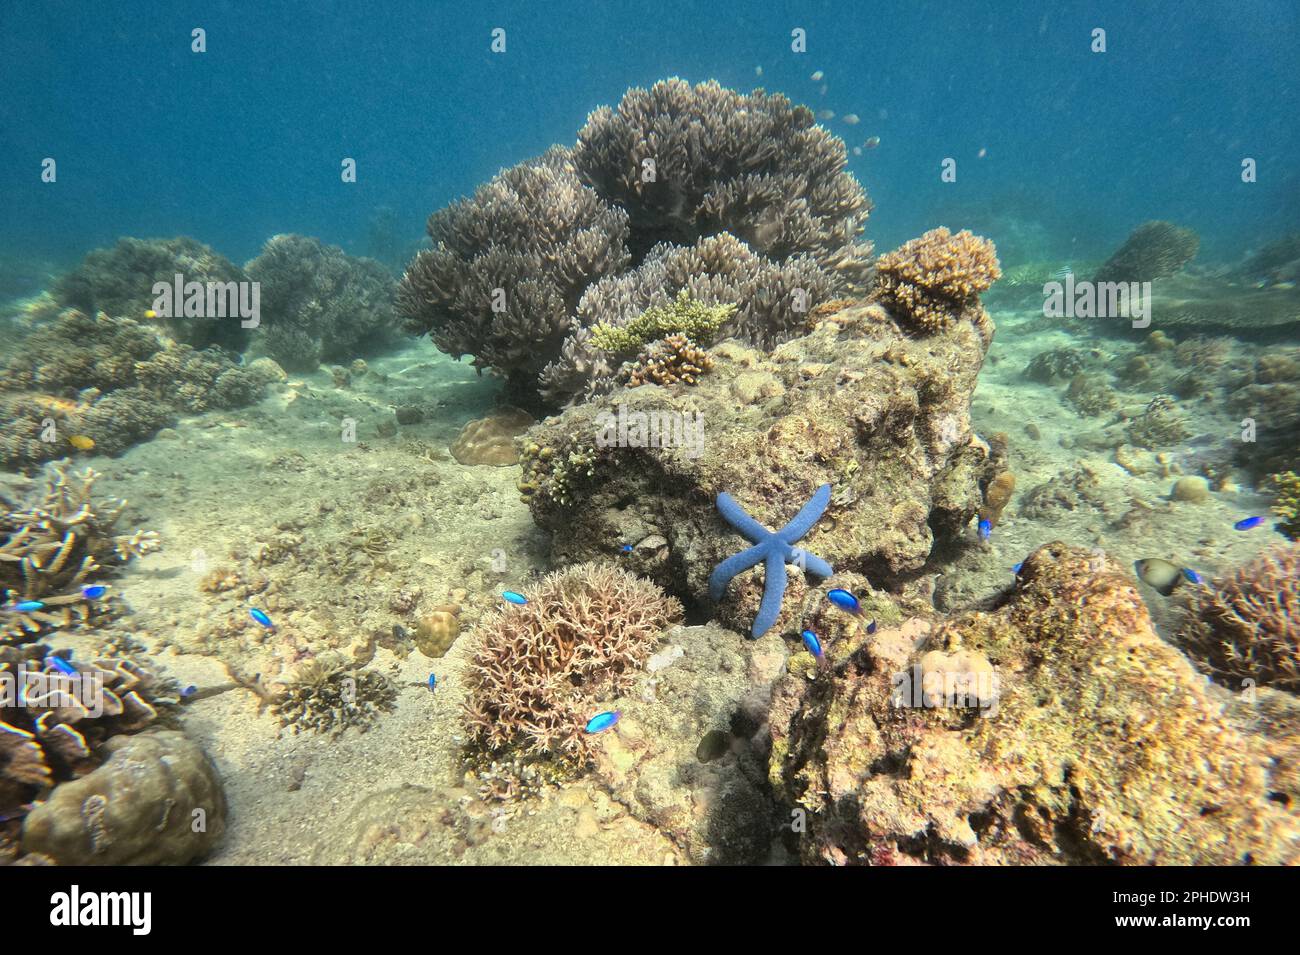 A blue starfish on a sunlit seabed with corals in Siquijor, Philippines. Stock Photo